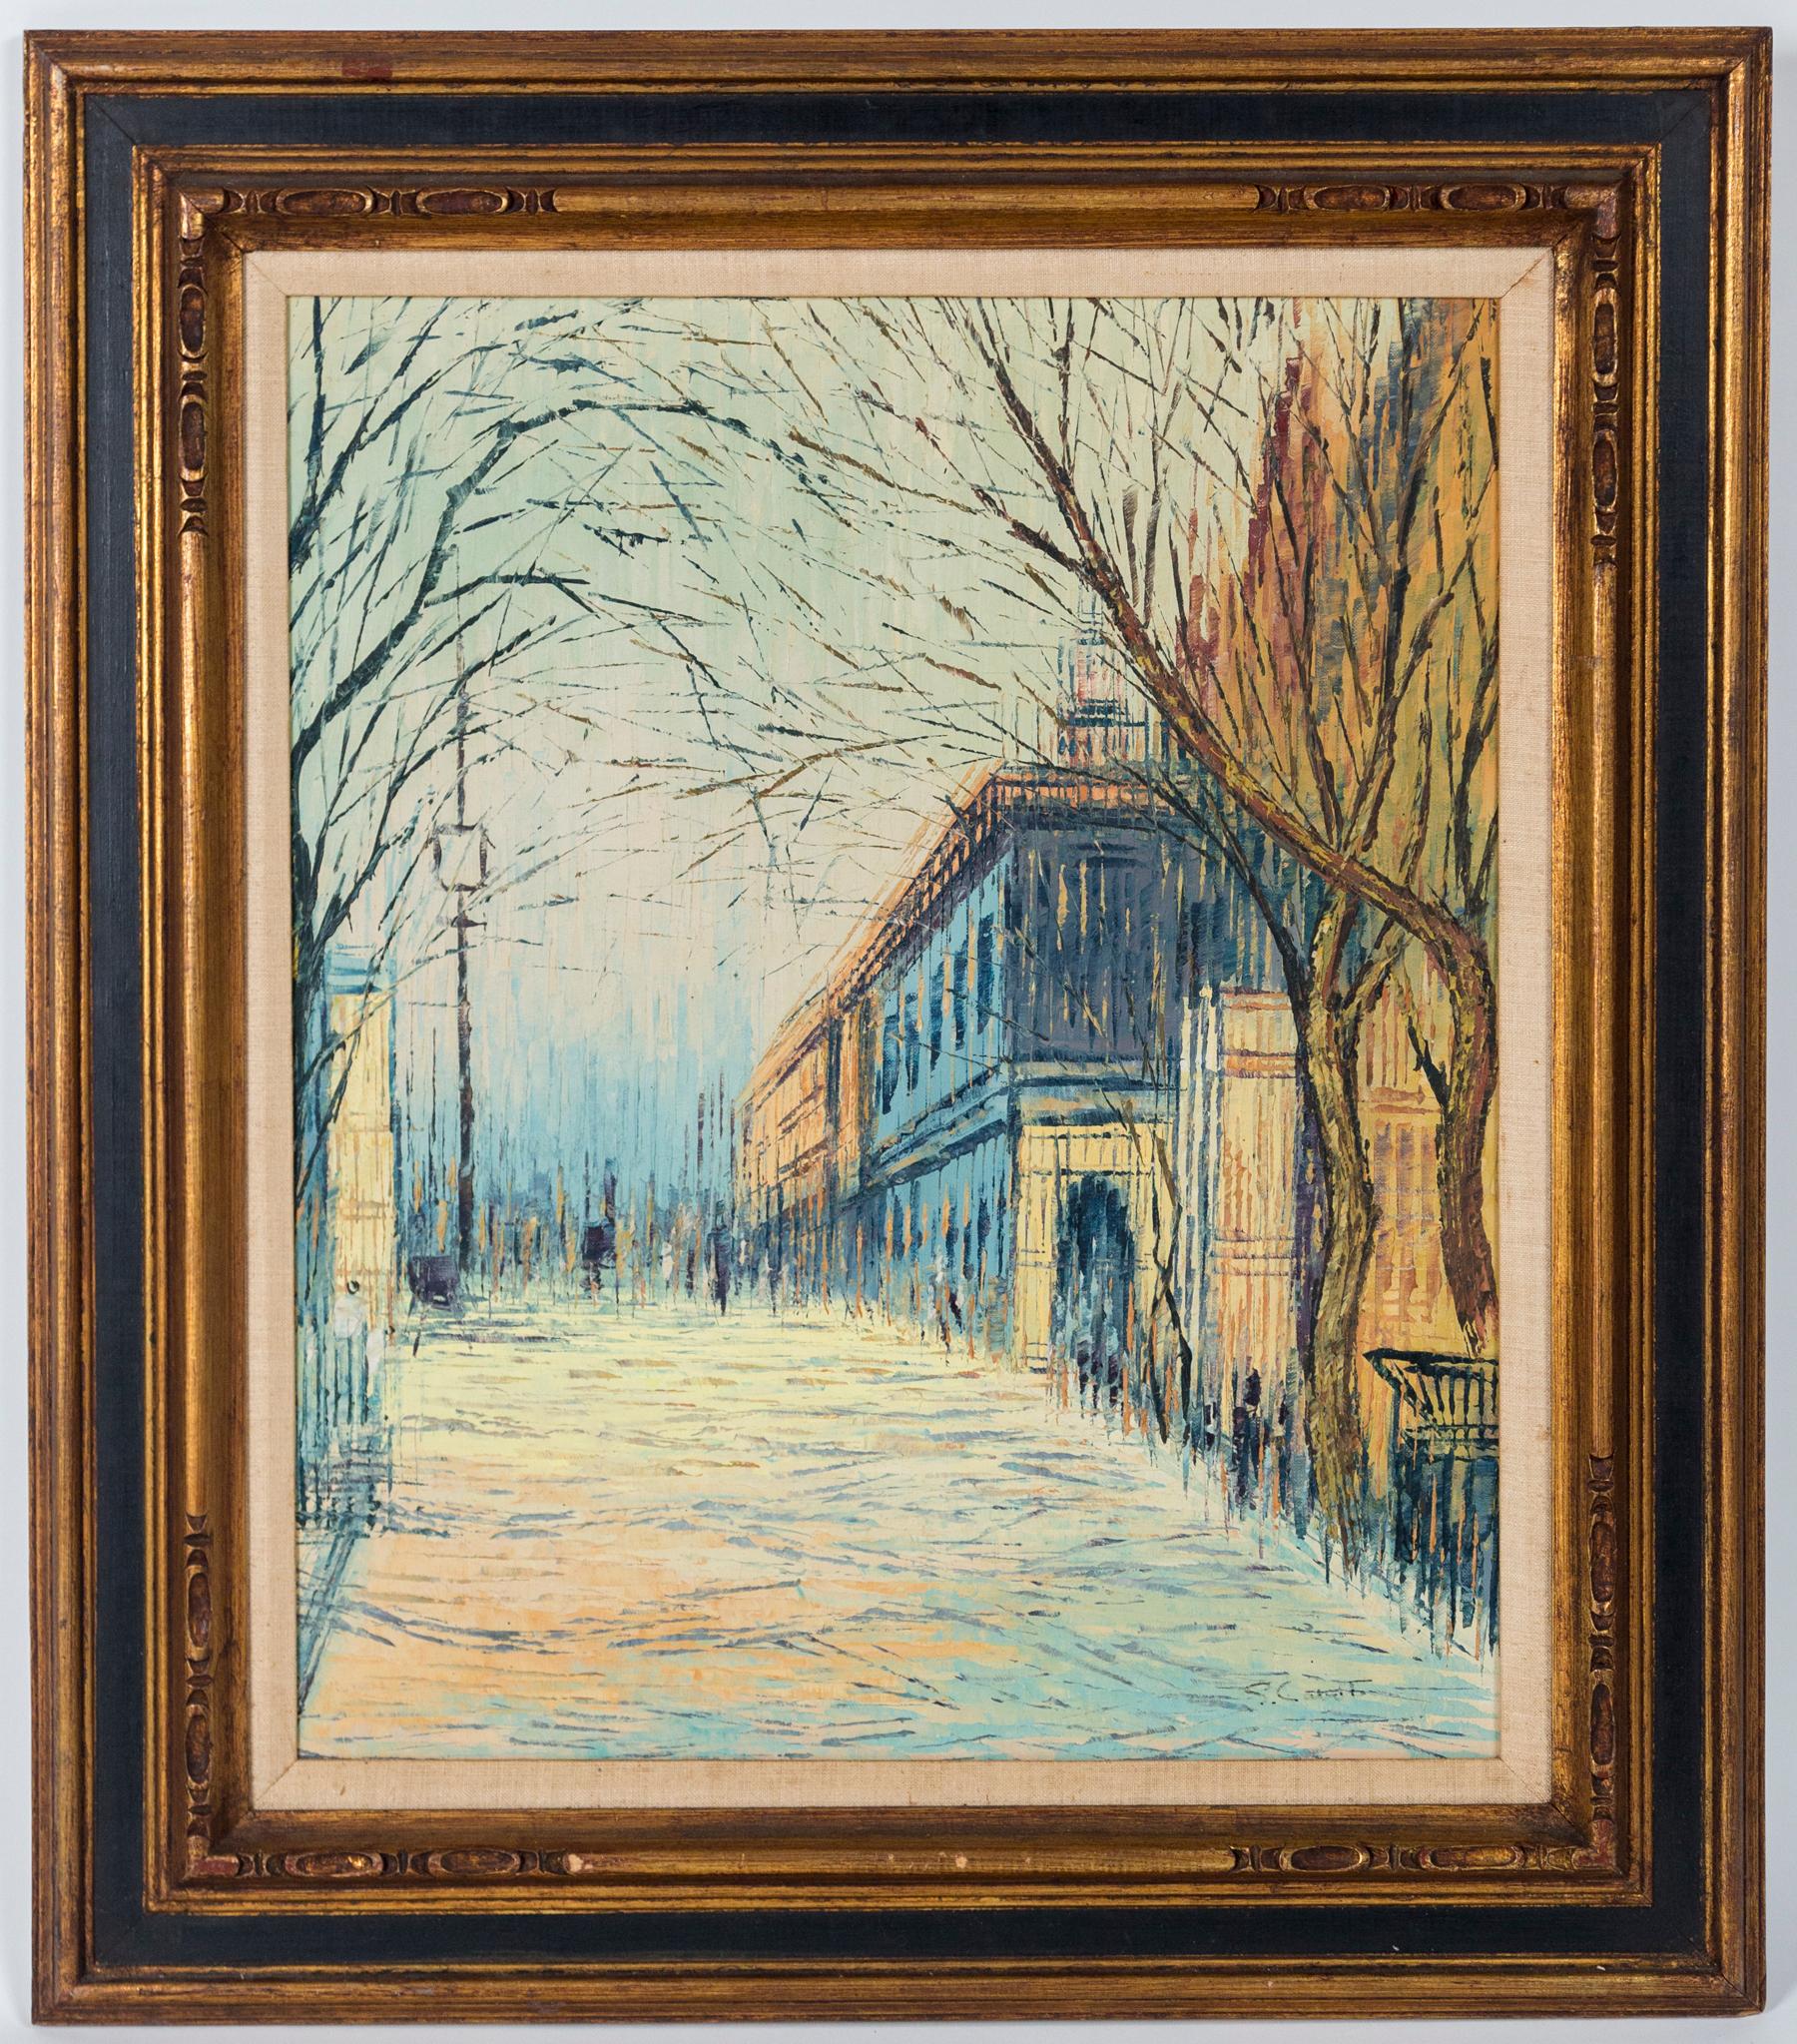 Framed oil on canvas, 'Cityscape', 20th Century. A streetscape rendered in an abstract style. Signed on lower right. Original carved, gilded frame with linen liner.